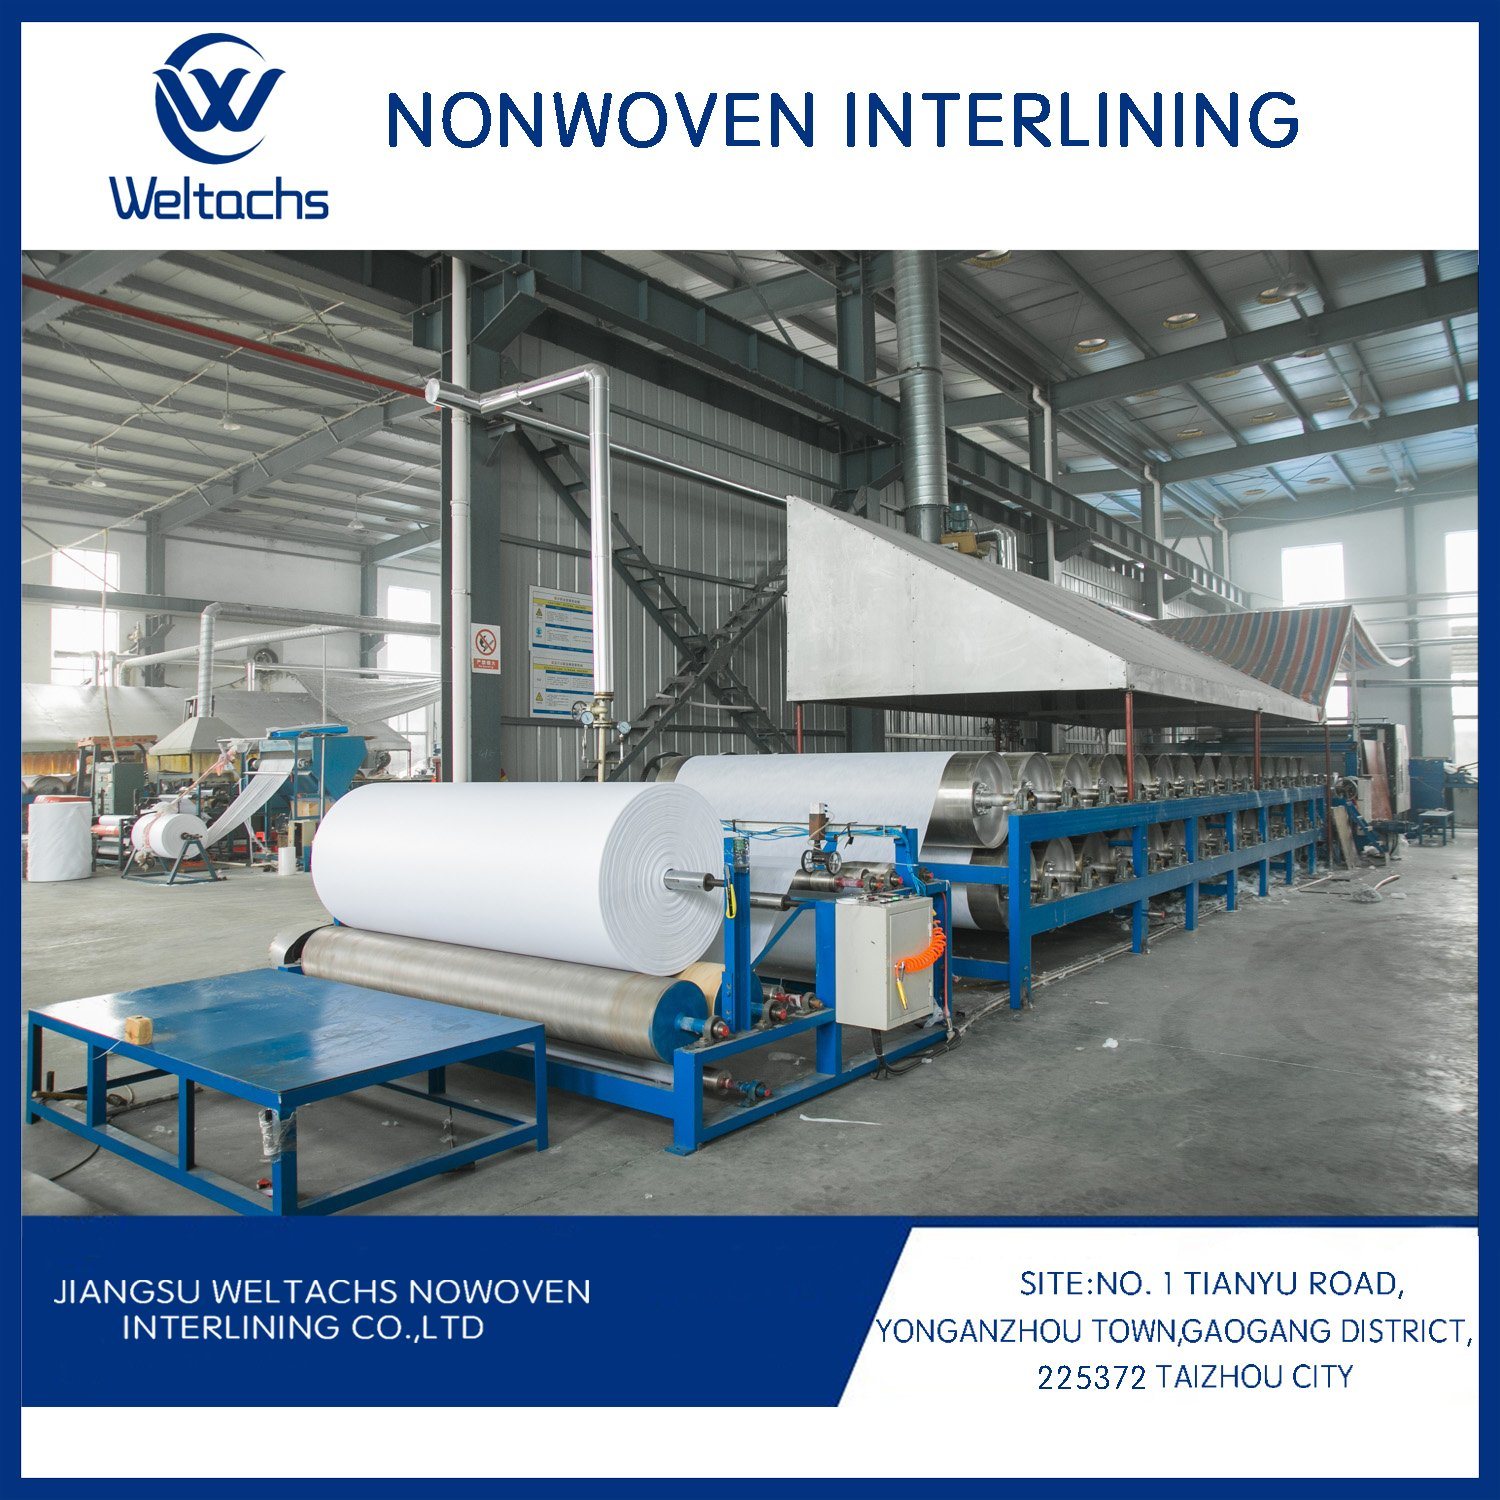 Shrink-Resistant Custom Colored Non Woven Fusible Interfacing